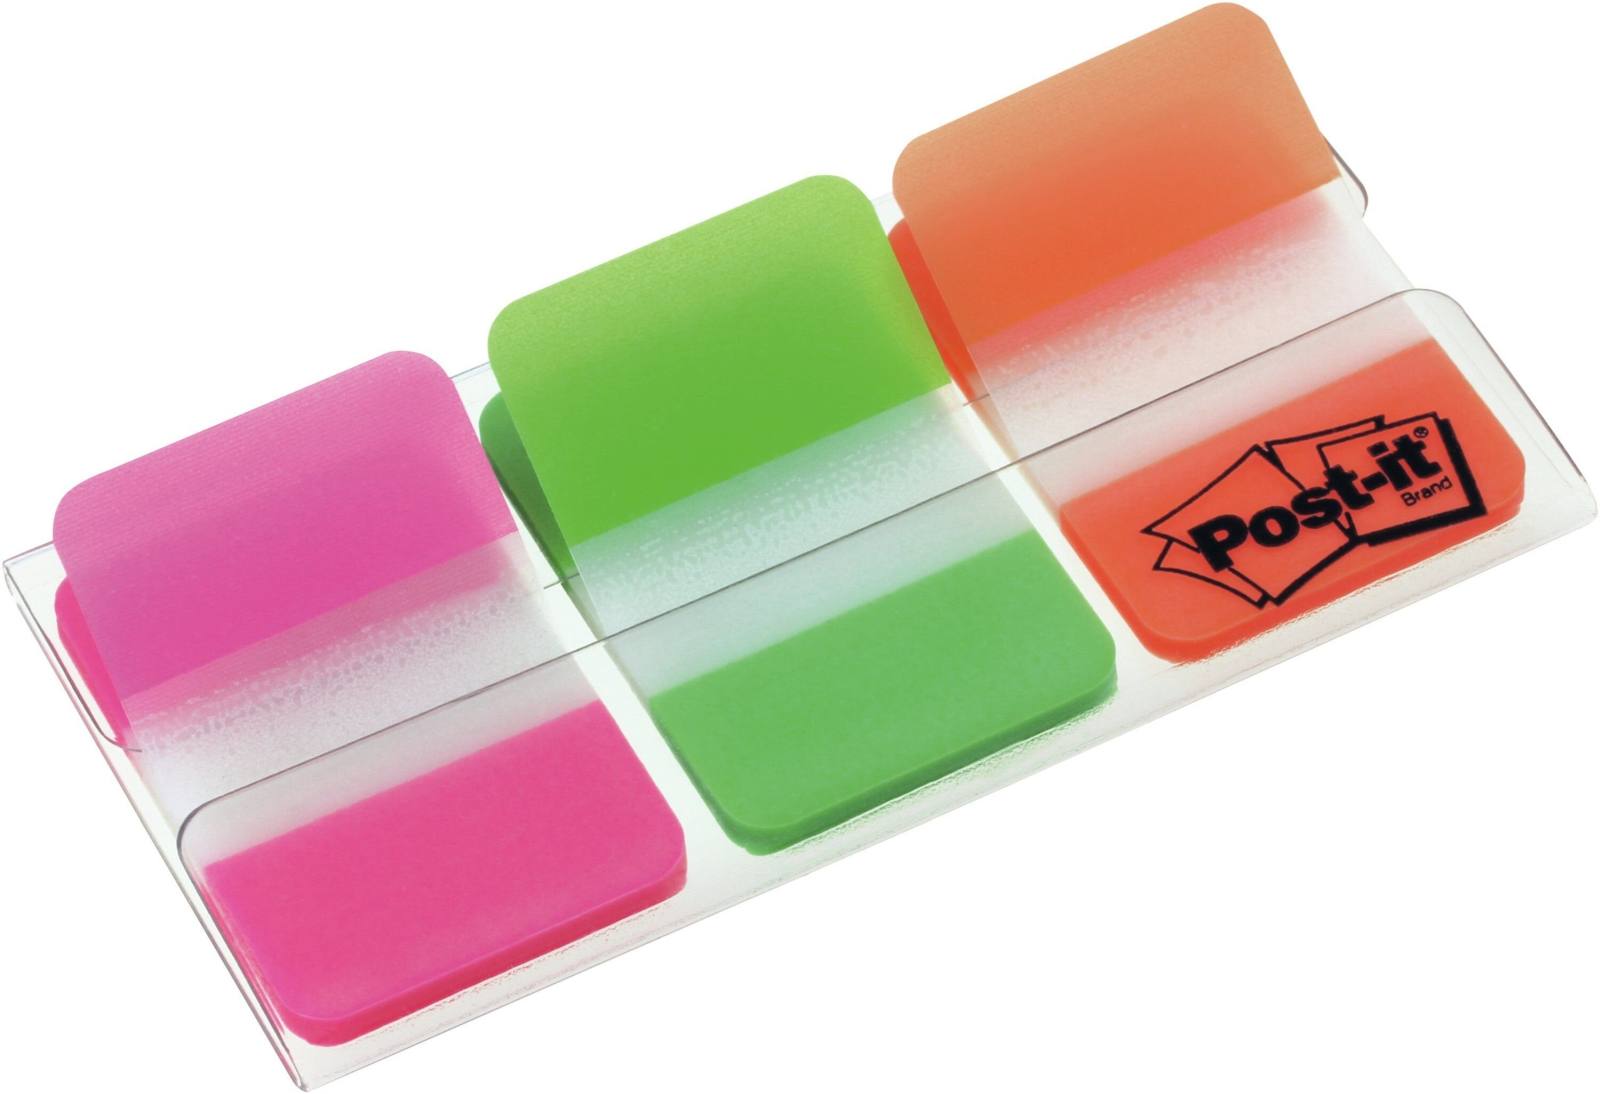 3M Post-it Index Strong 686-PGO, 25.4 mm x 38 mm, green, orange, pink, 3 x 22 adhesive strips